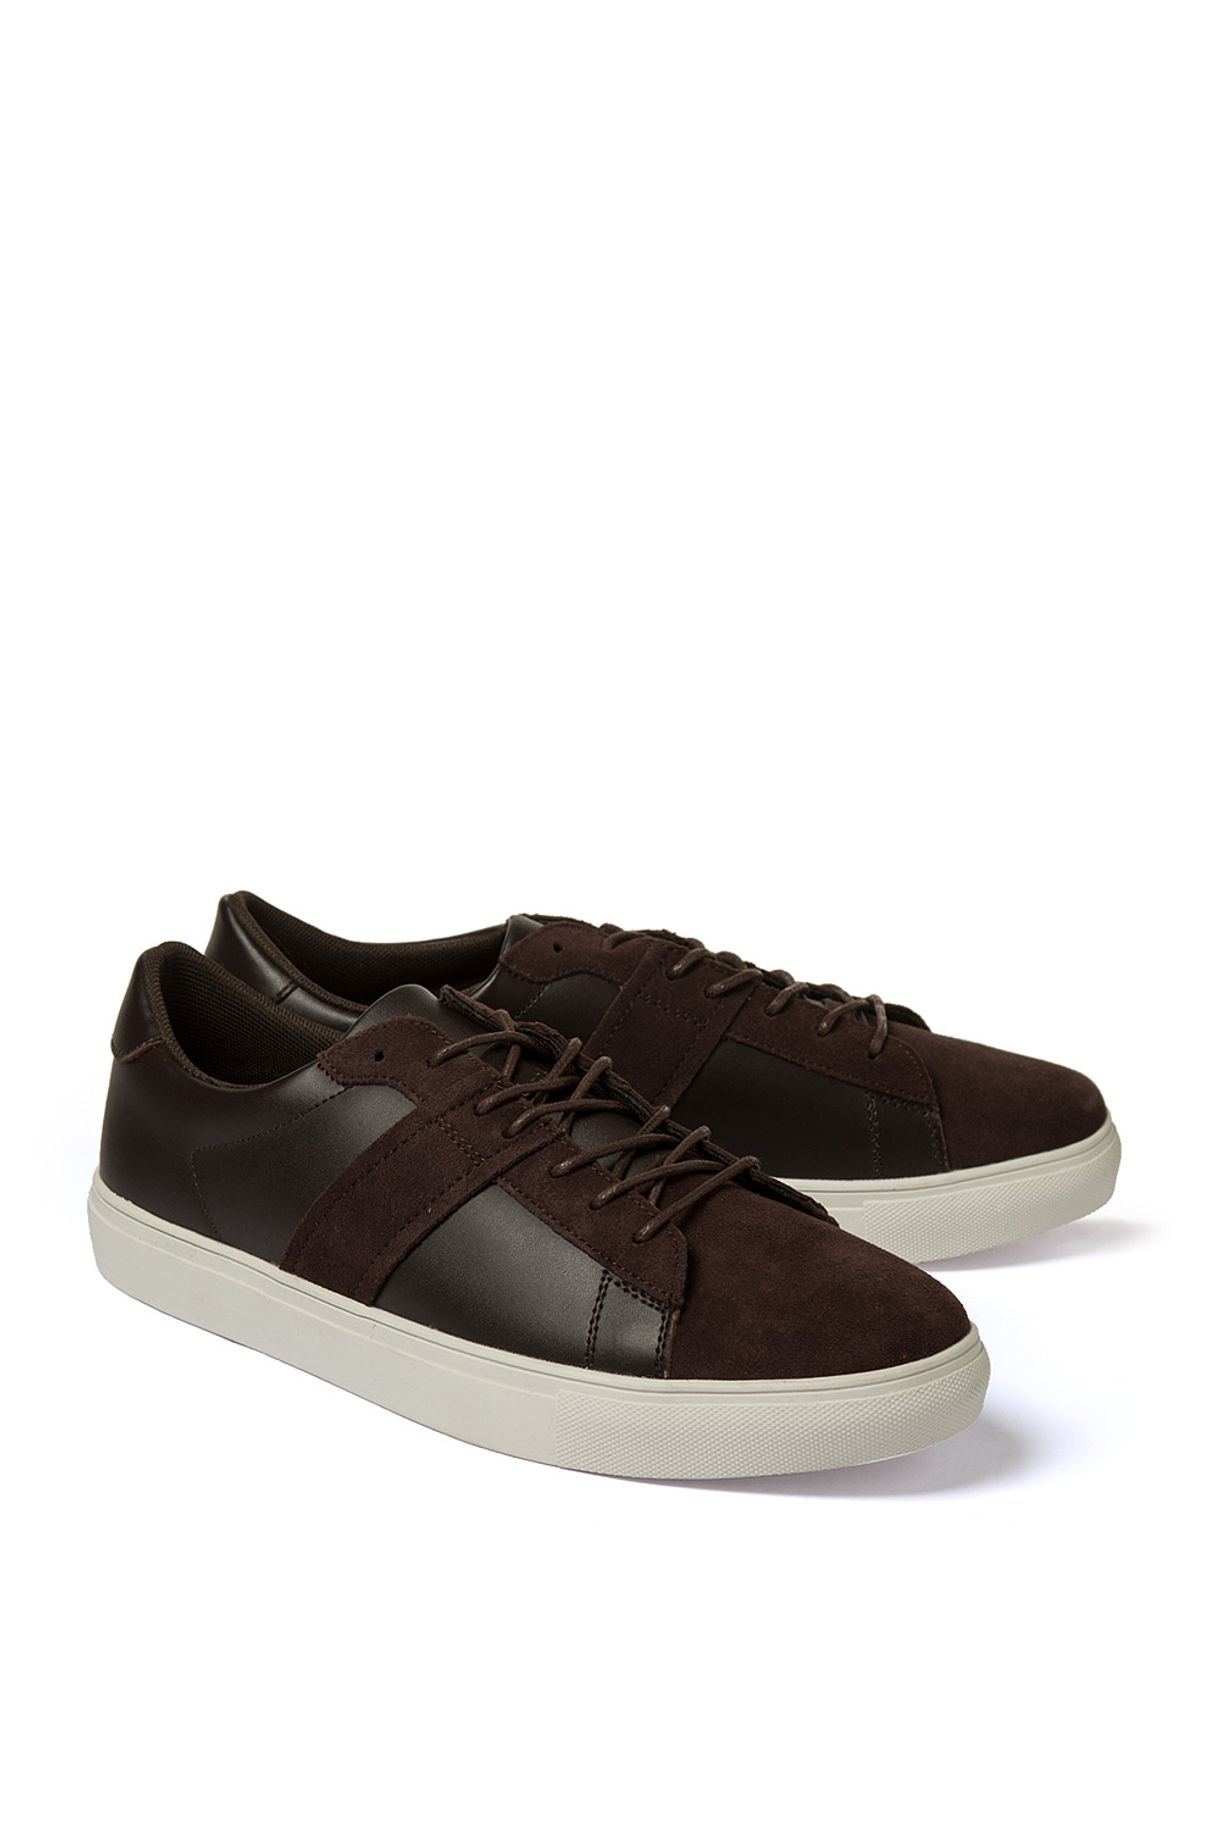 M1013 MEN'S LEATHER SNEAKERS